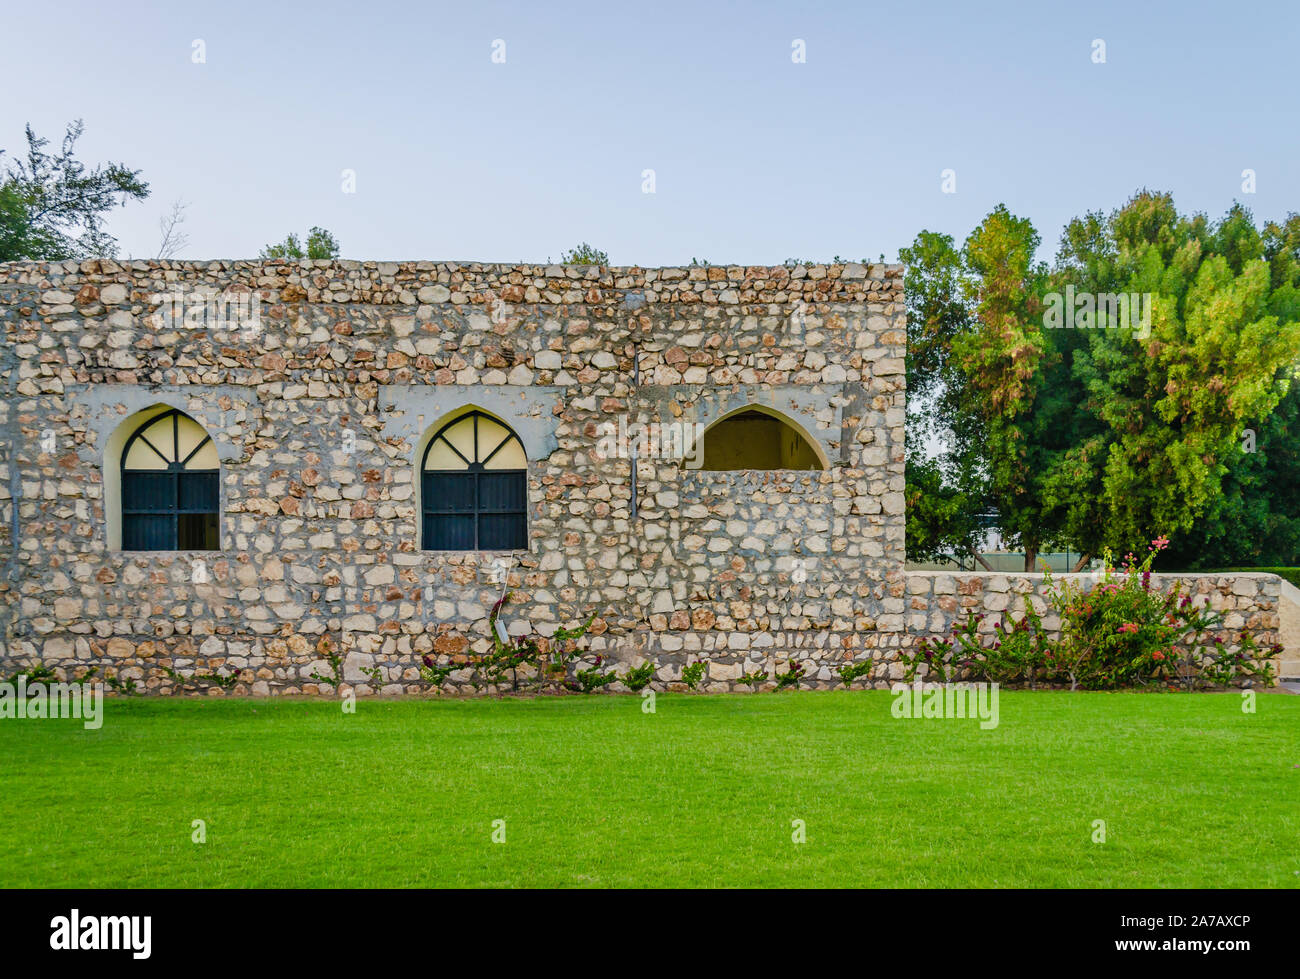 Old Fashioned Stone House with black window arches surrounded by plants and a green lawn in front. From Muscat, Oman. Stock Photo